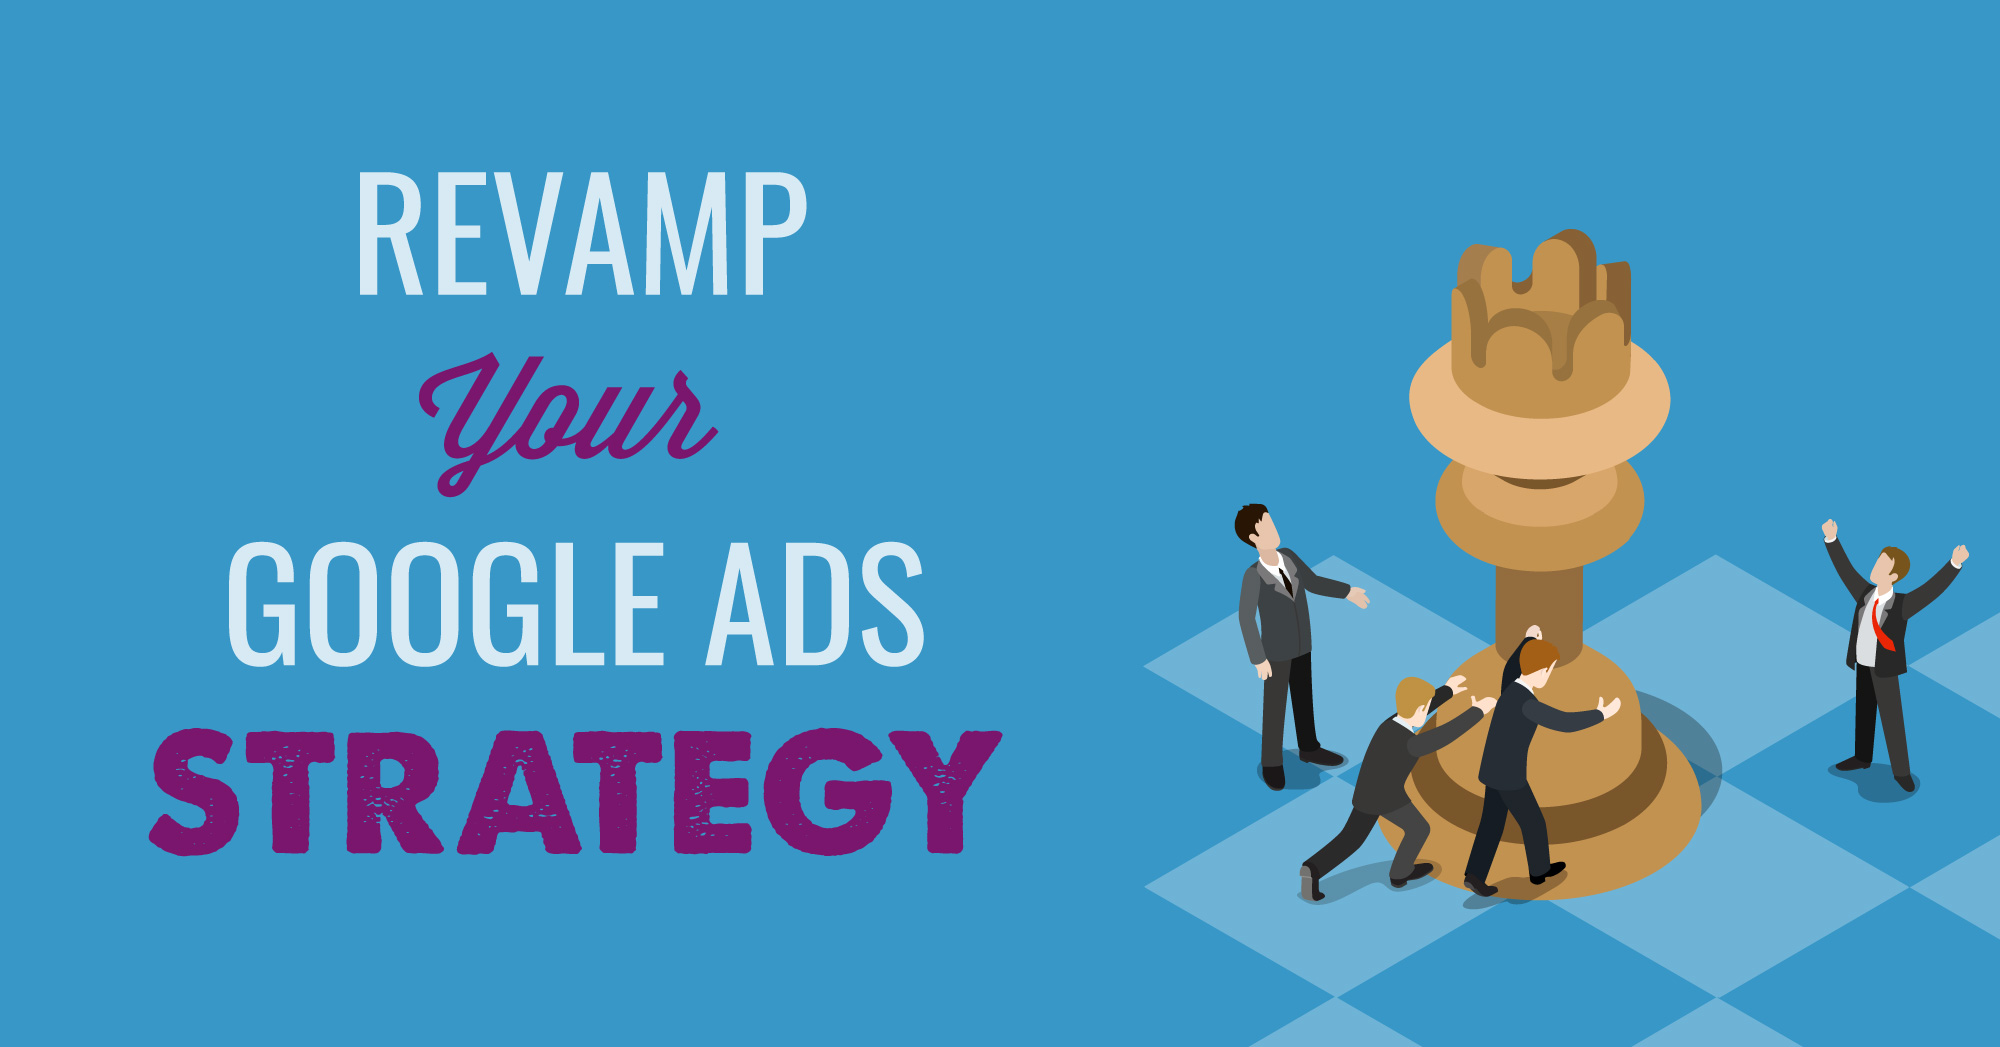 Overcome These 4 Google Ads Mistakes to Beat the Competition